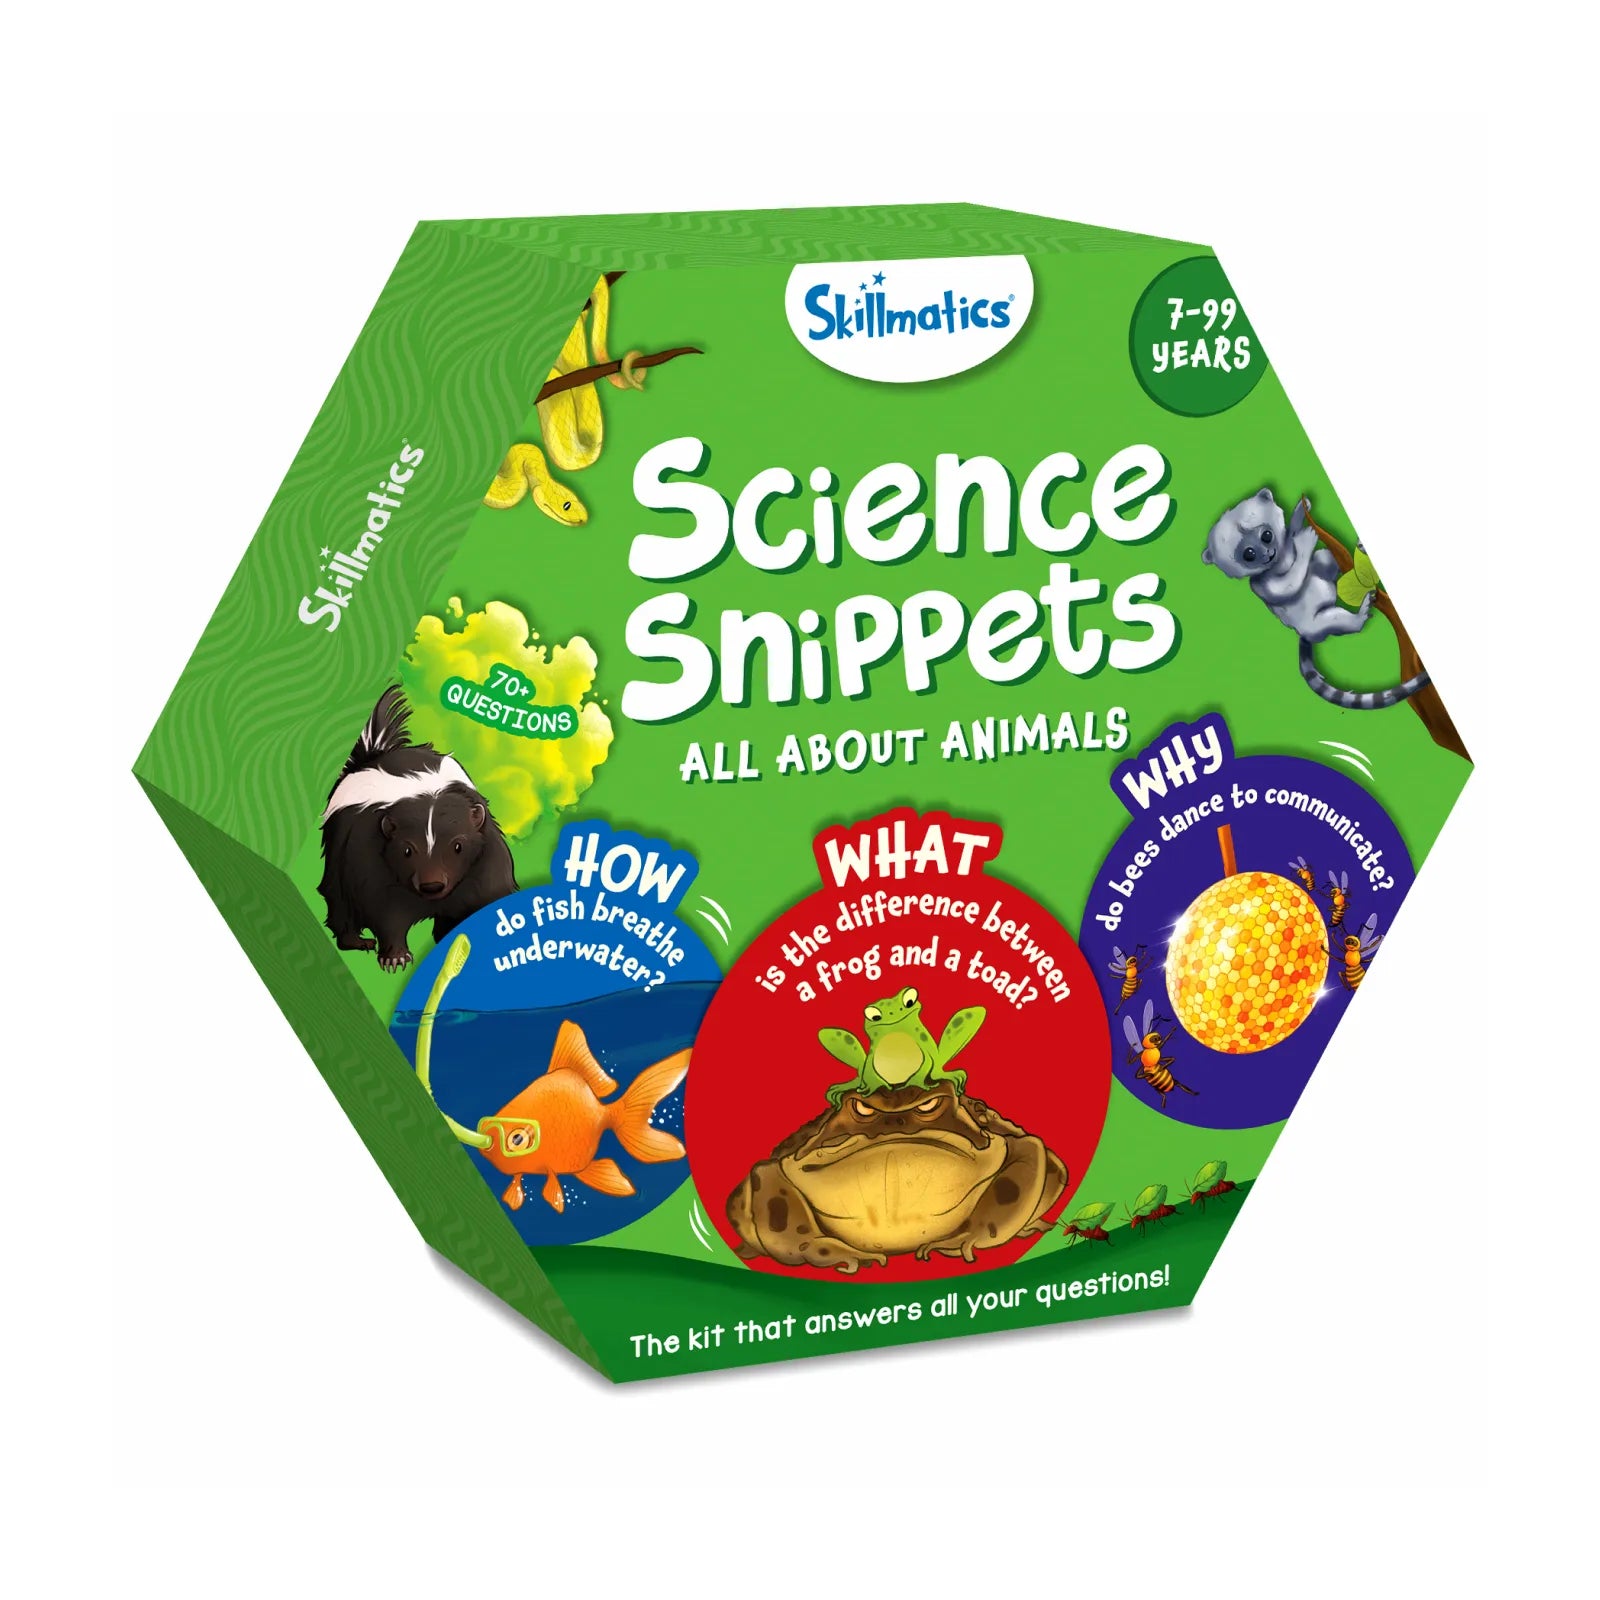 Science Snippets Kit | All About Animals (ages 7+)